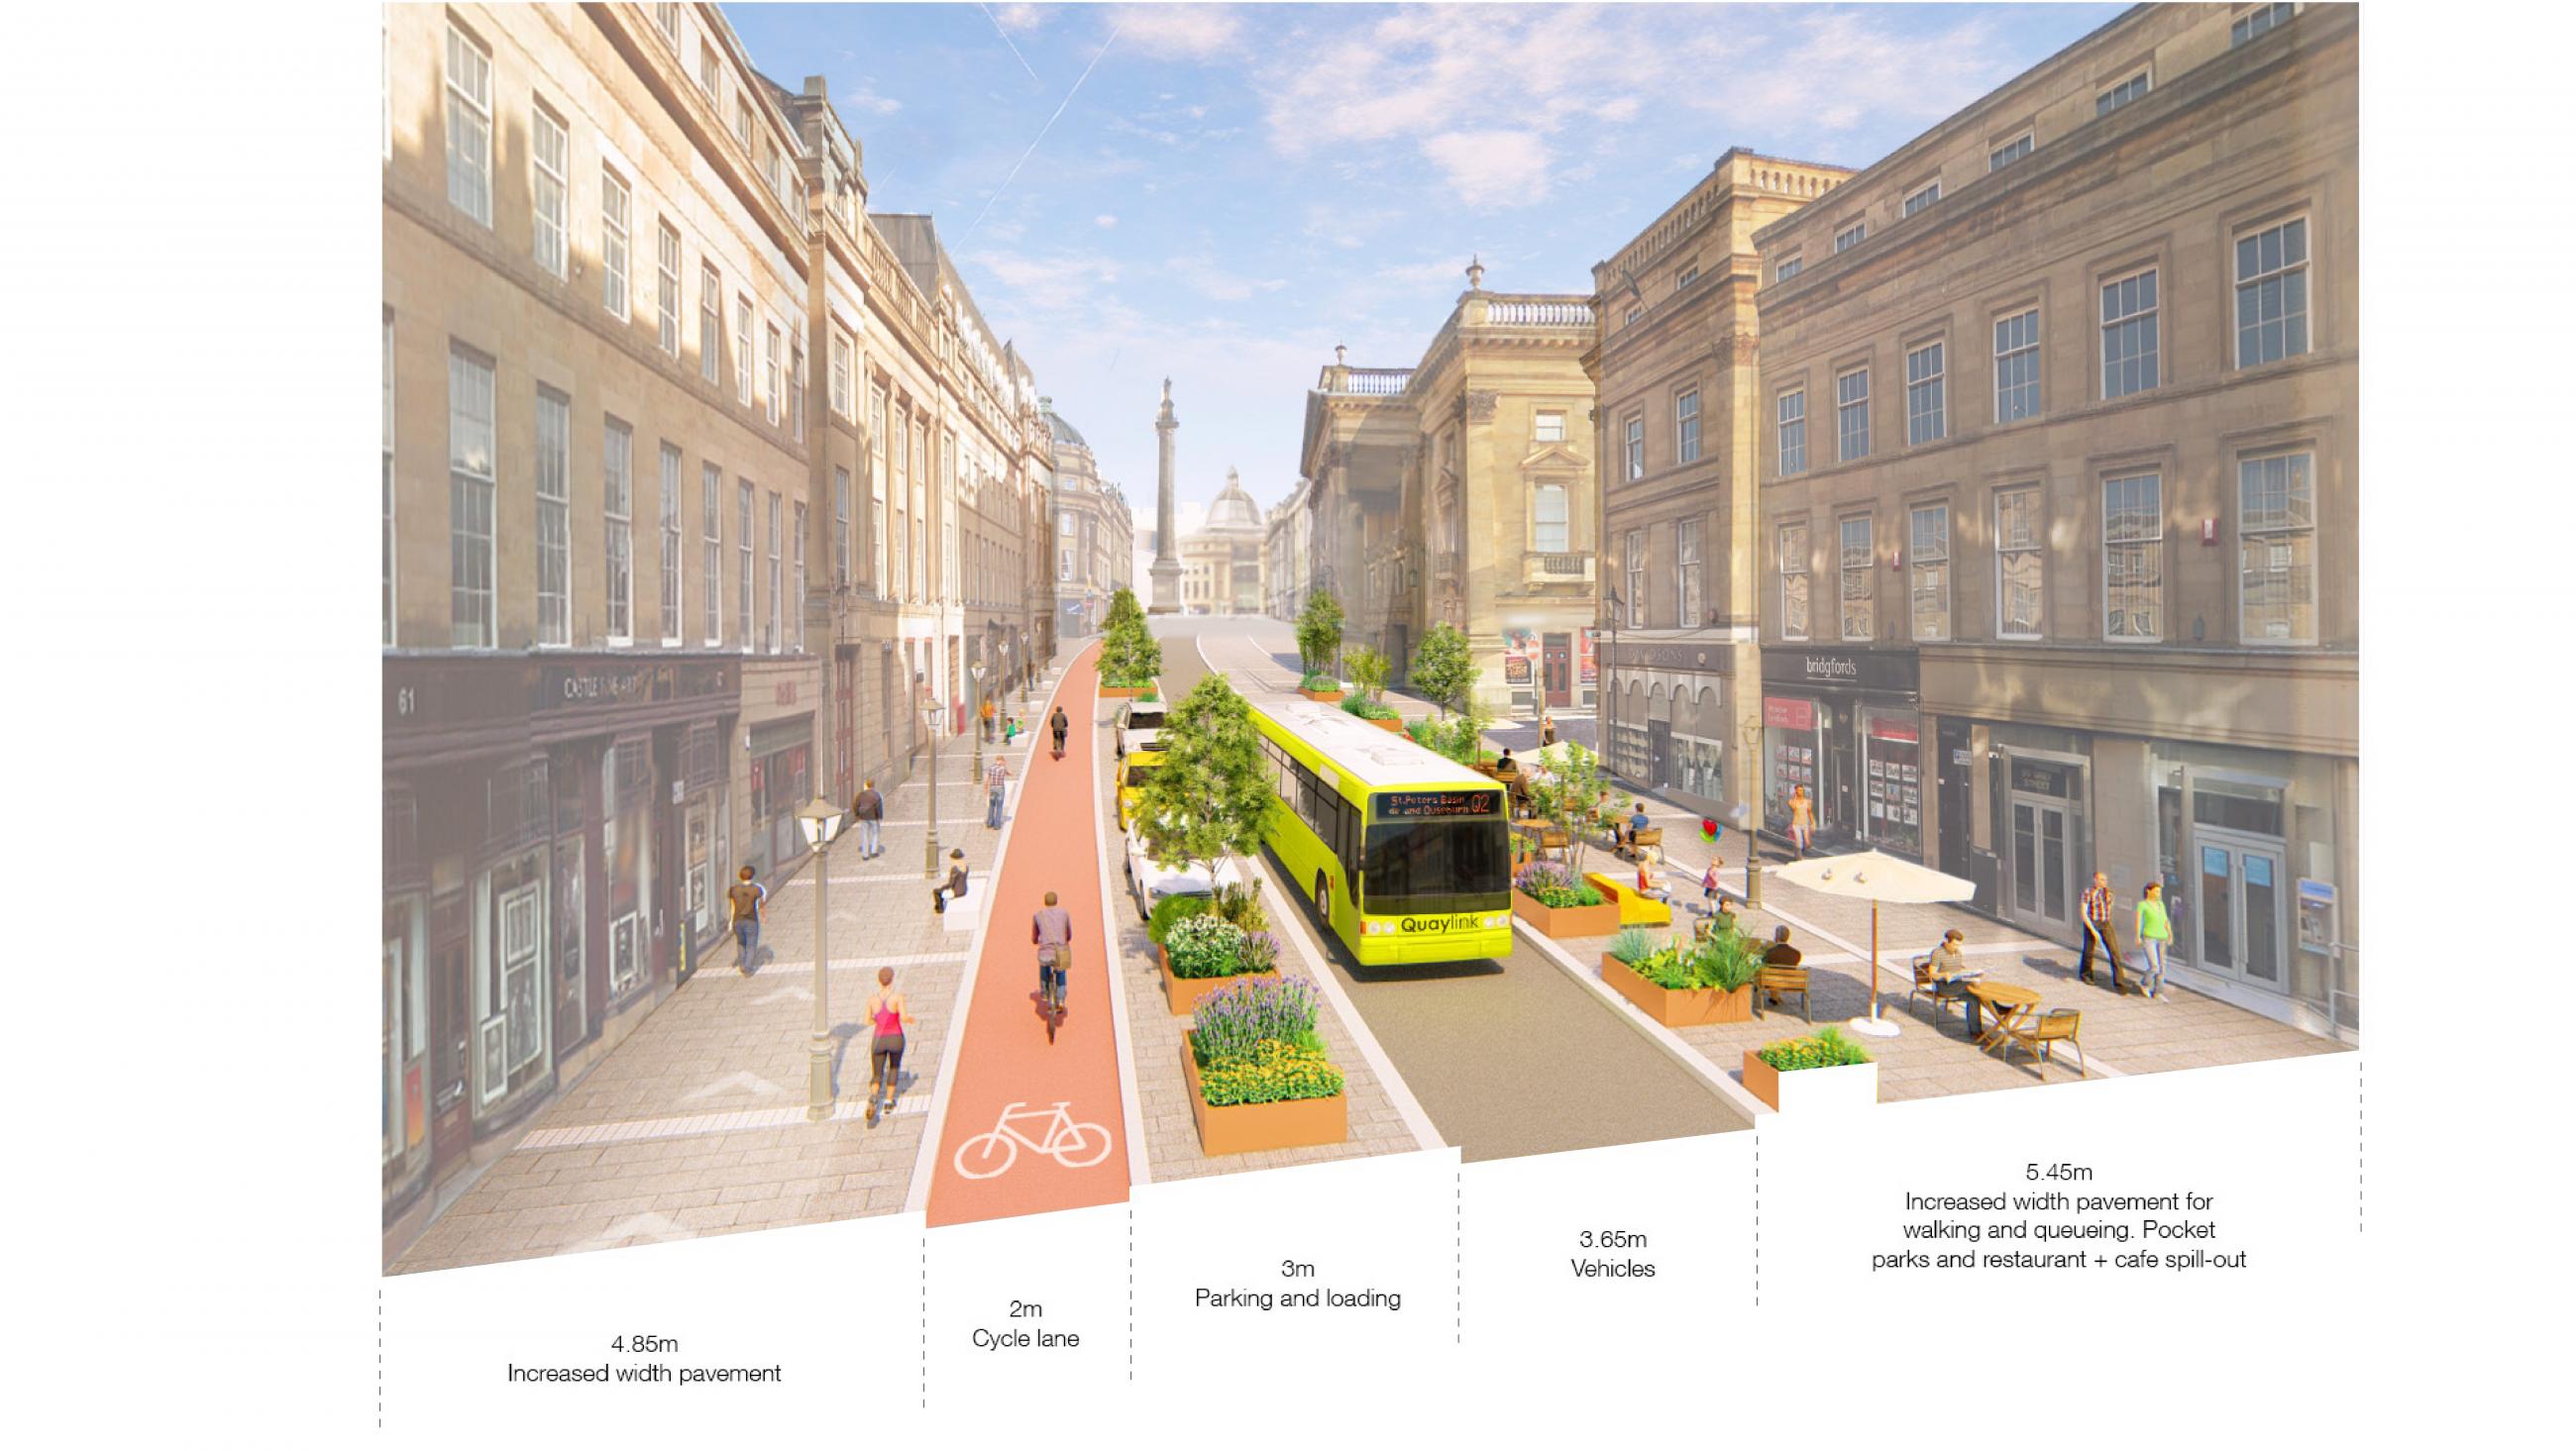 Artist impressions showing a potential new layout for Grey Street with space for walking, cycling and vehicles.